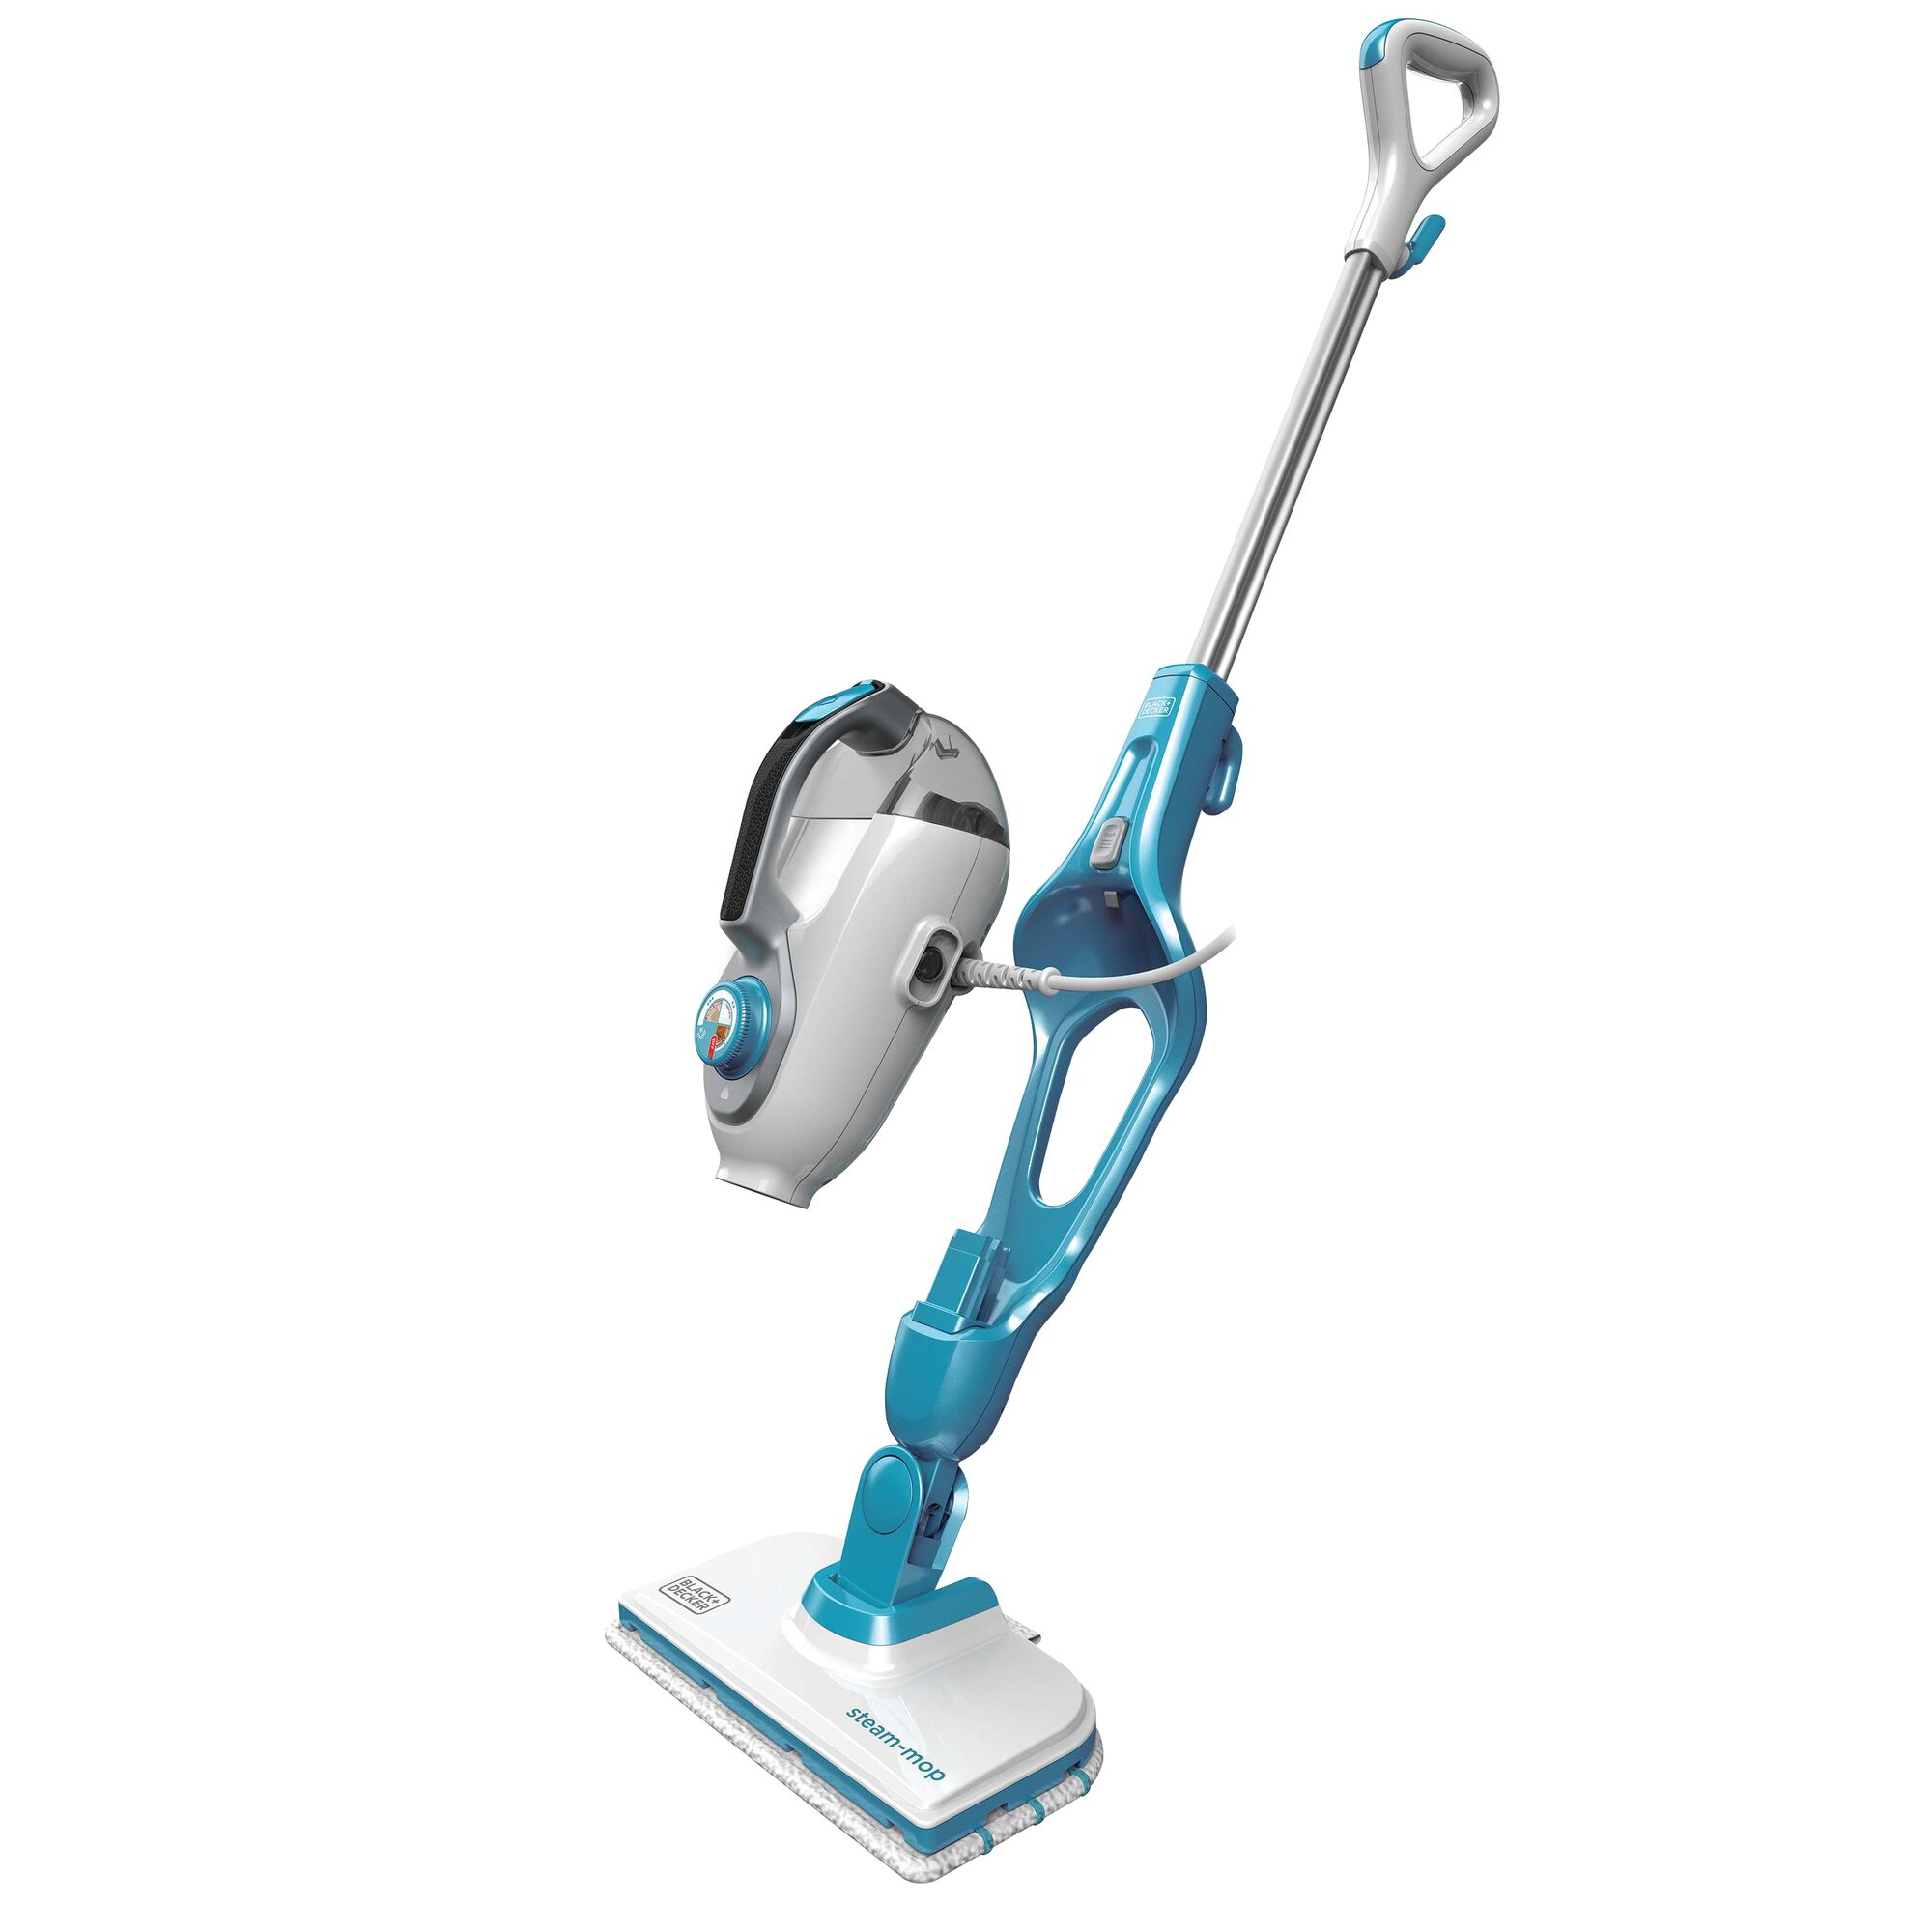 8 in 1 Complete Steam Cleaning System with handheld part detached.